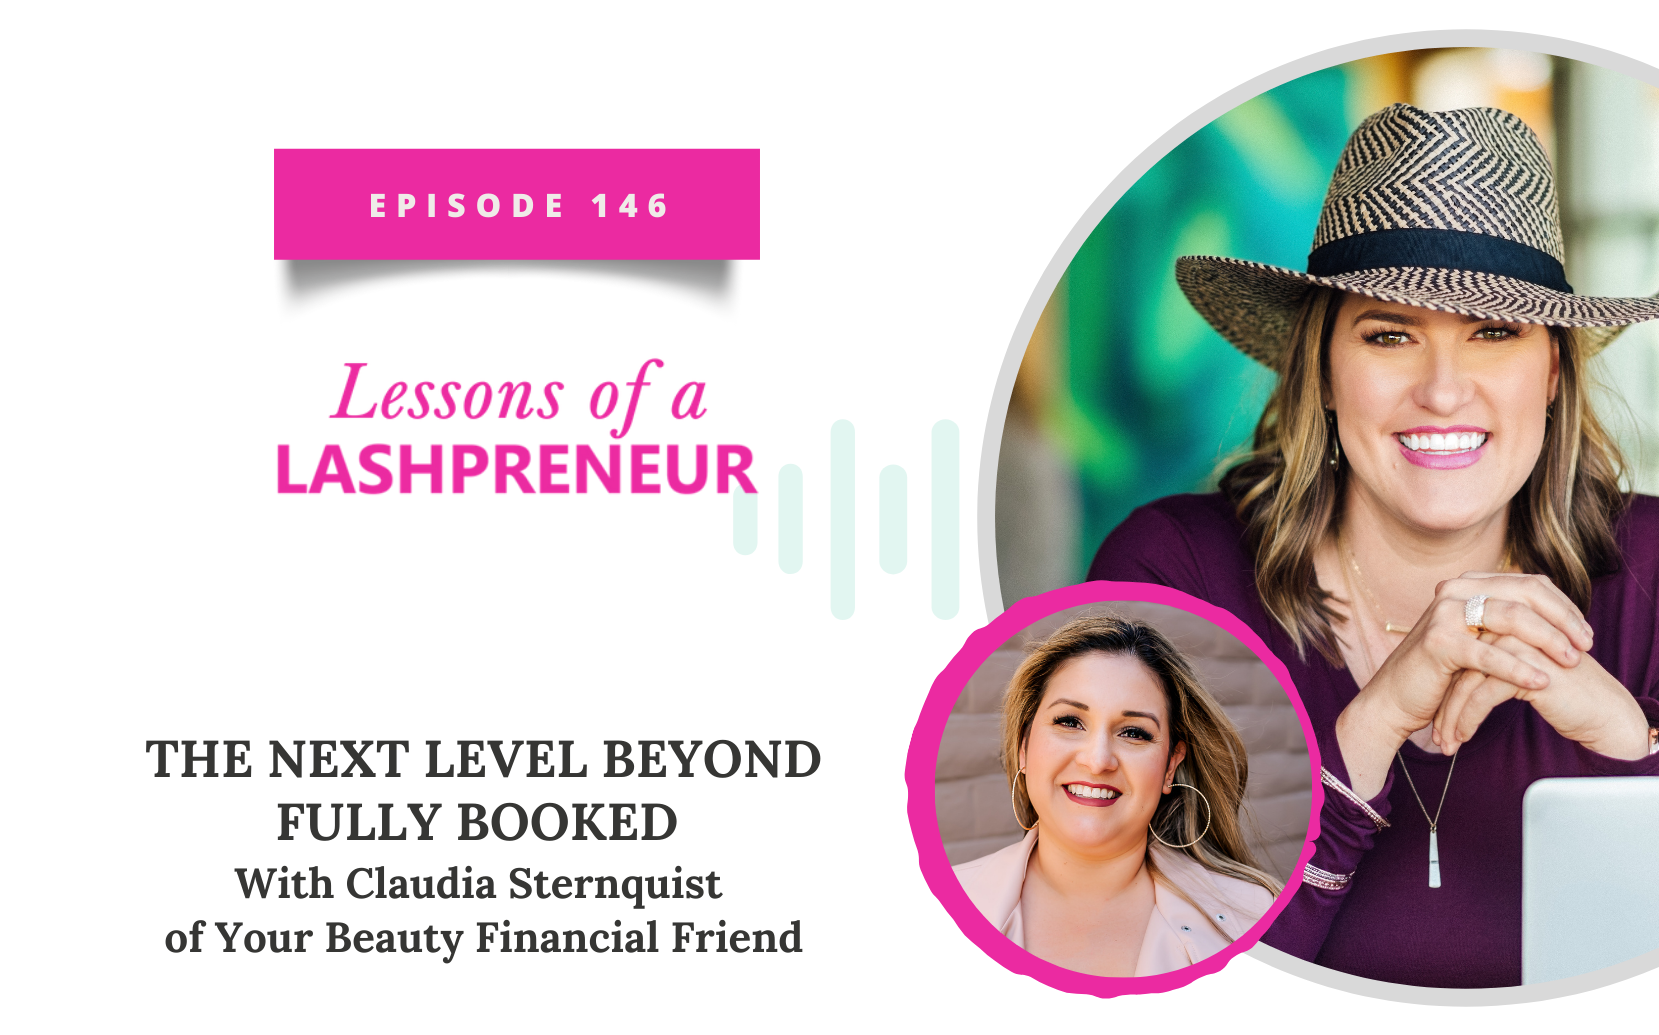 The Next Level Beyond Fully Booked  With Claudia Sternquist of Your Beauty Financial Friend